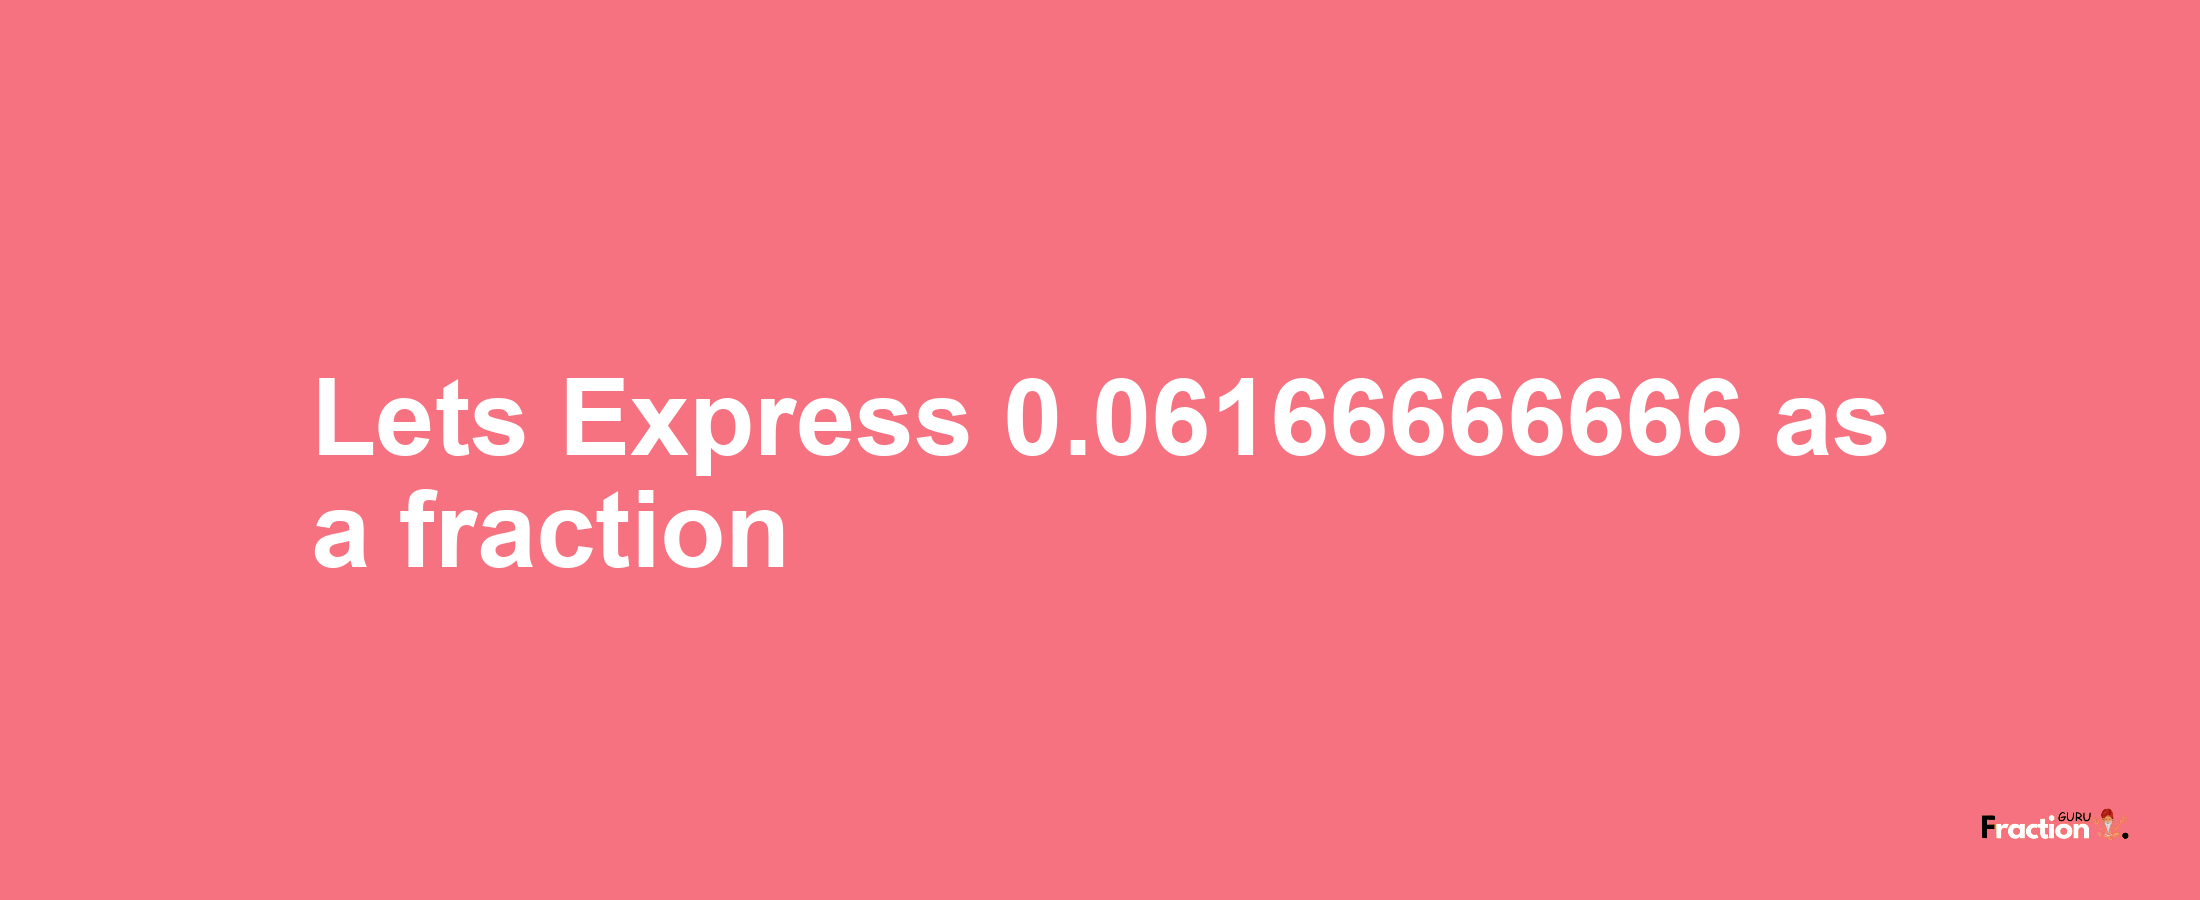 Lets Express 0.06166666666 as afraction